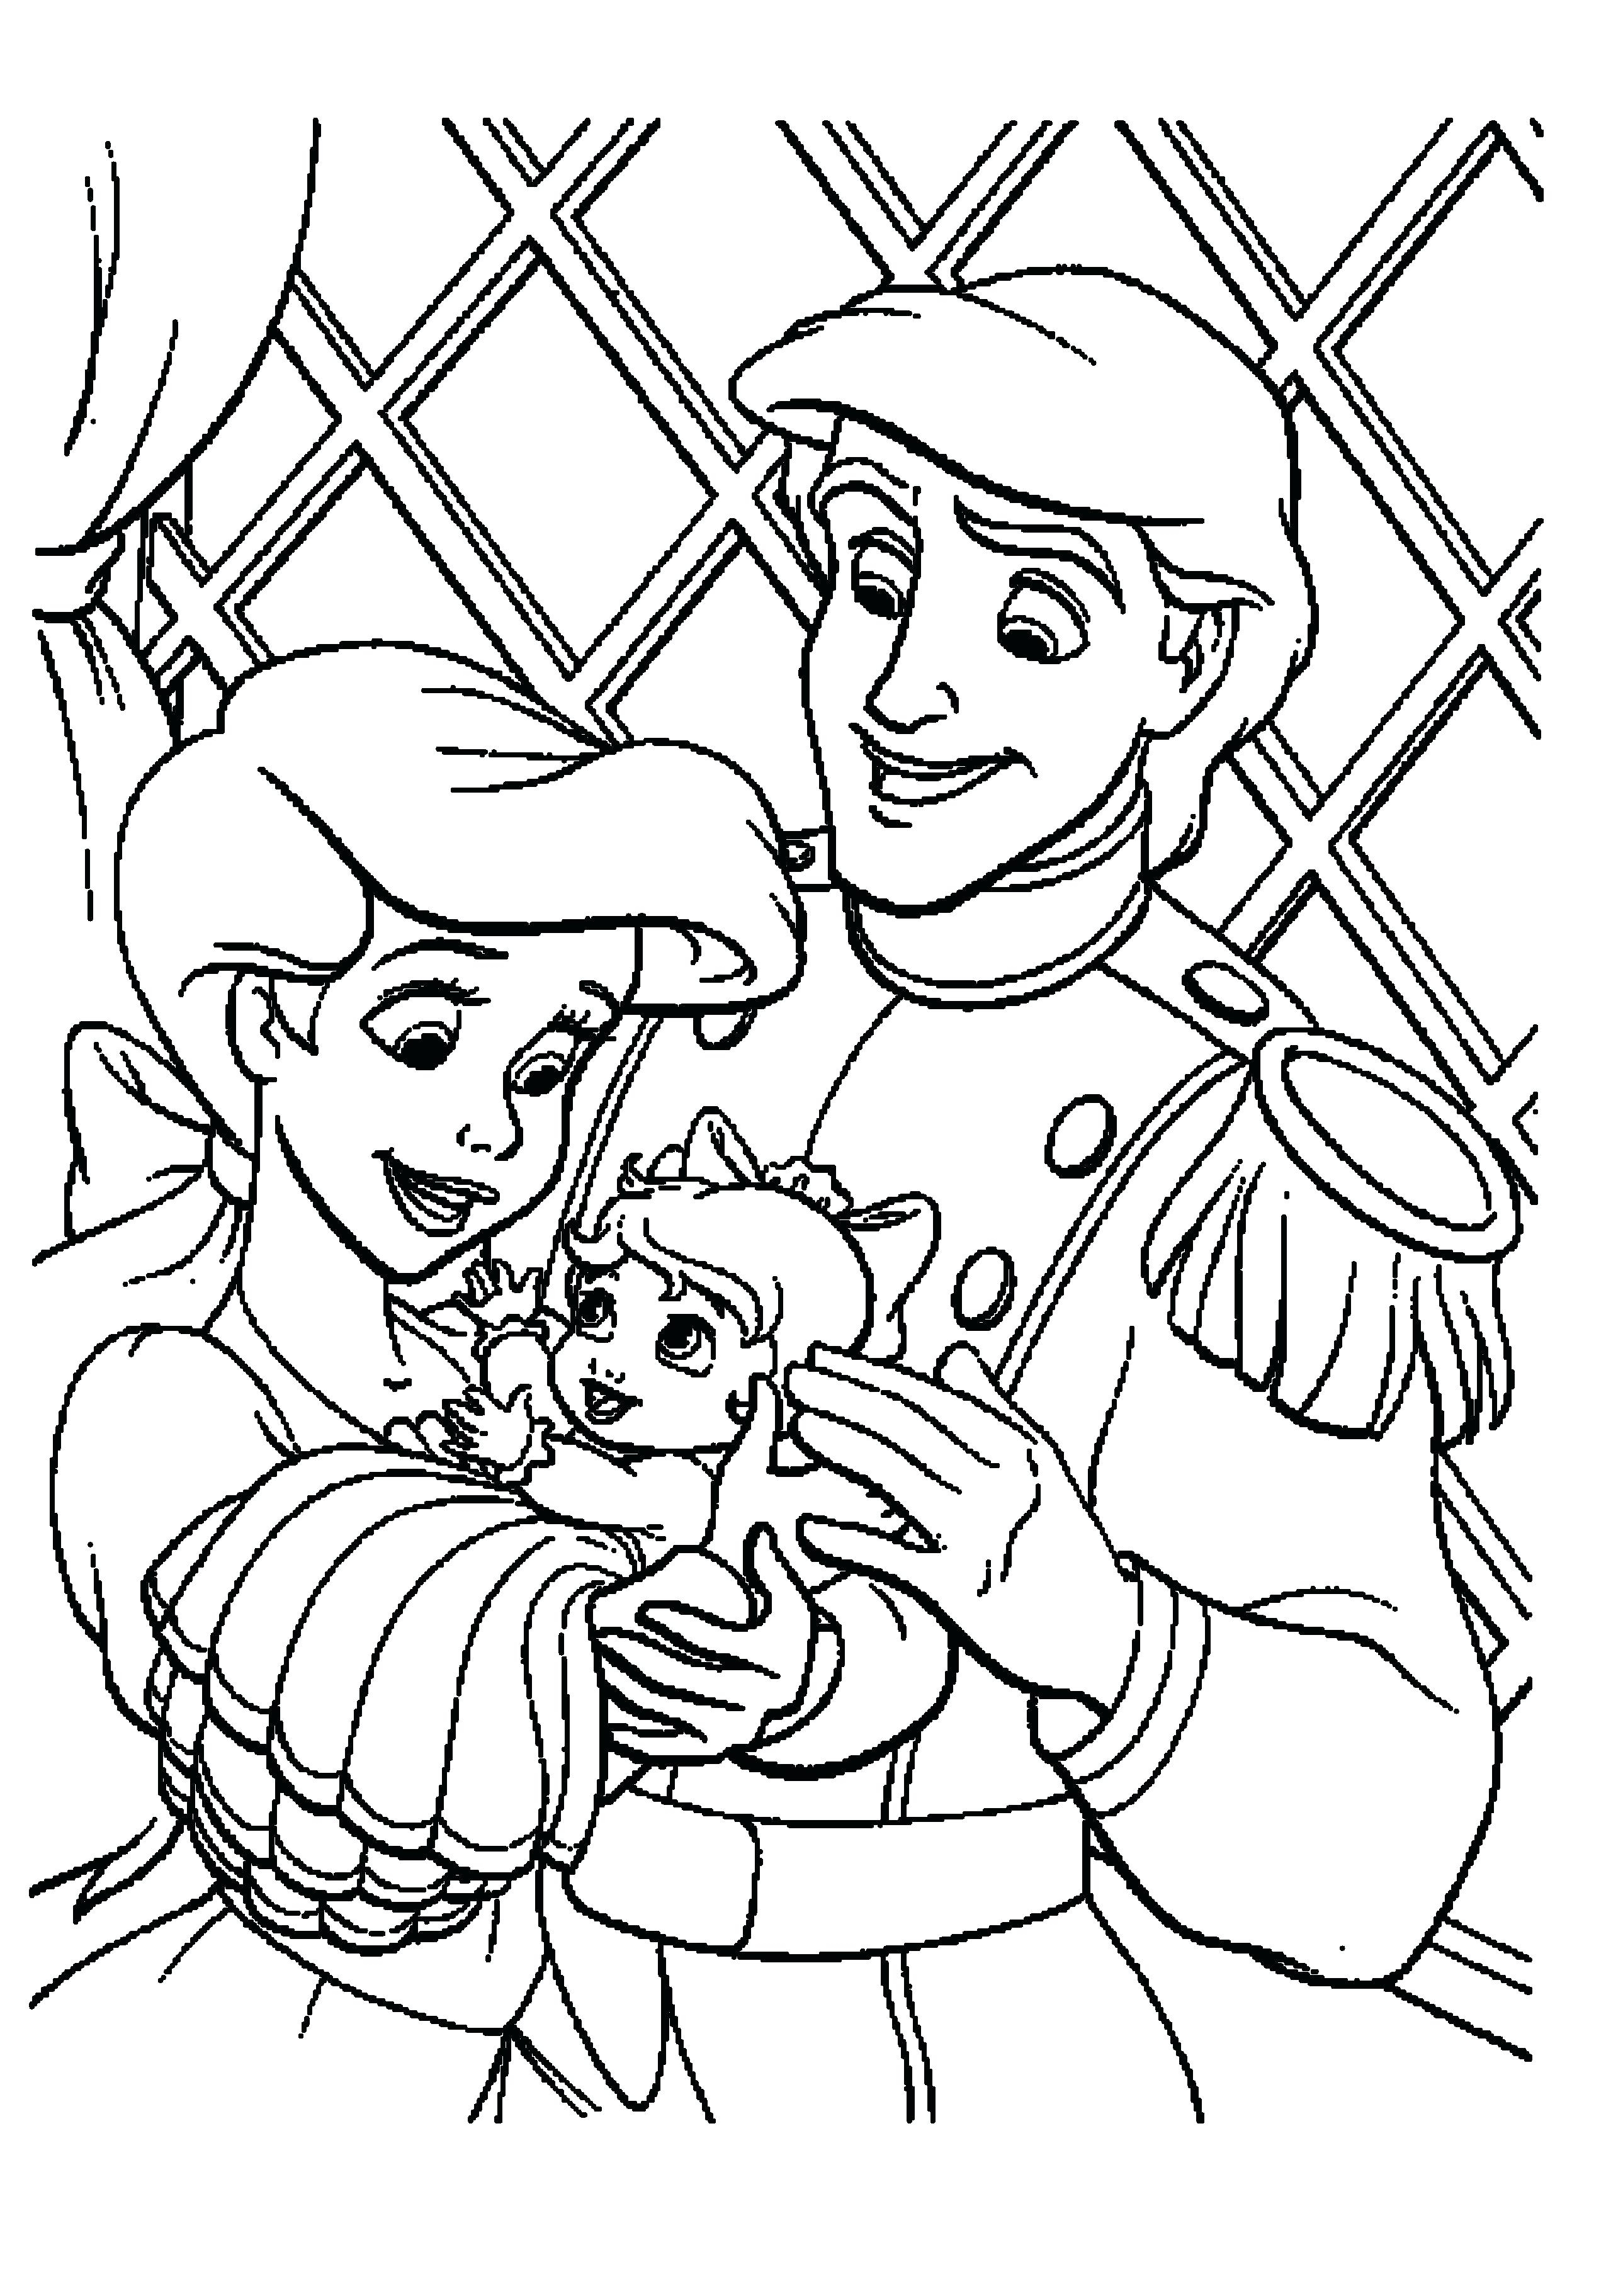 Little Mermaid 2 Coloring Pages At Getcolorings.com | Free Printable